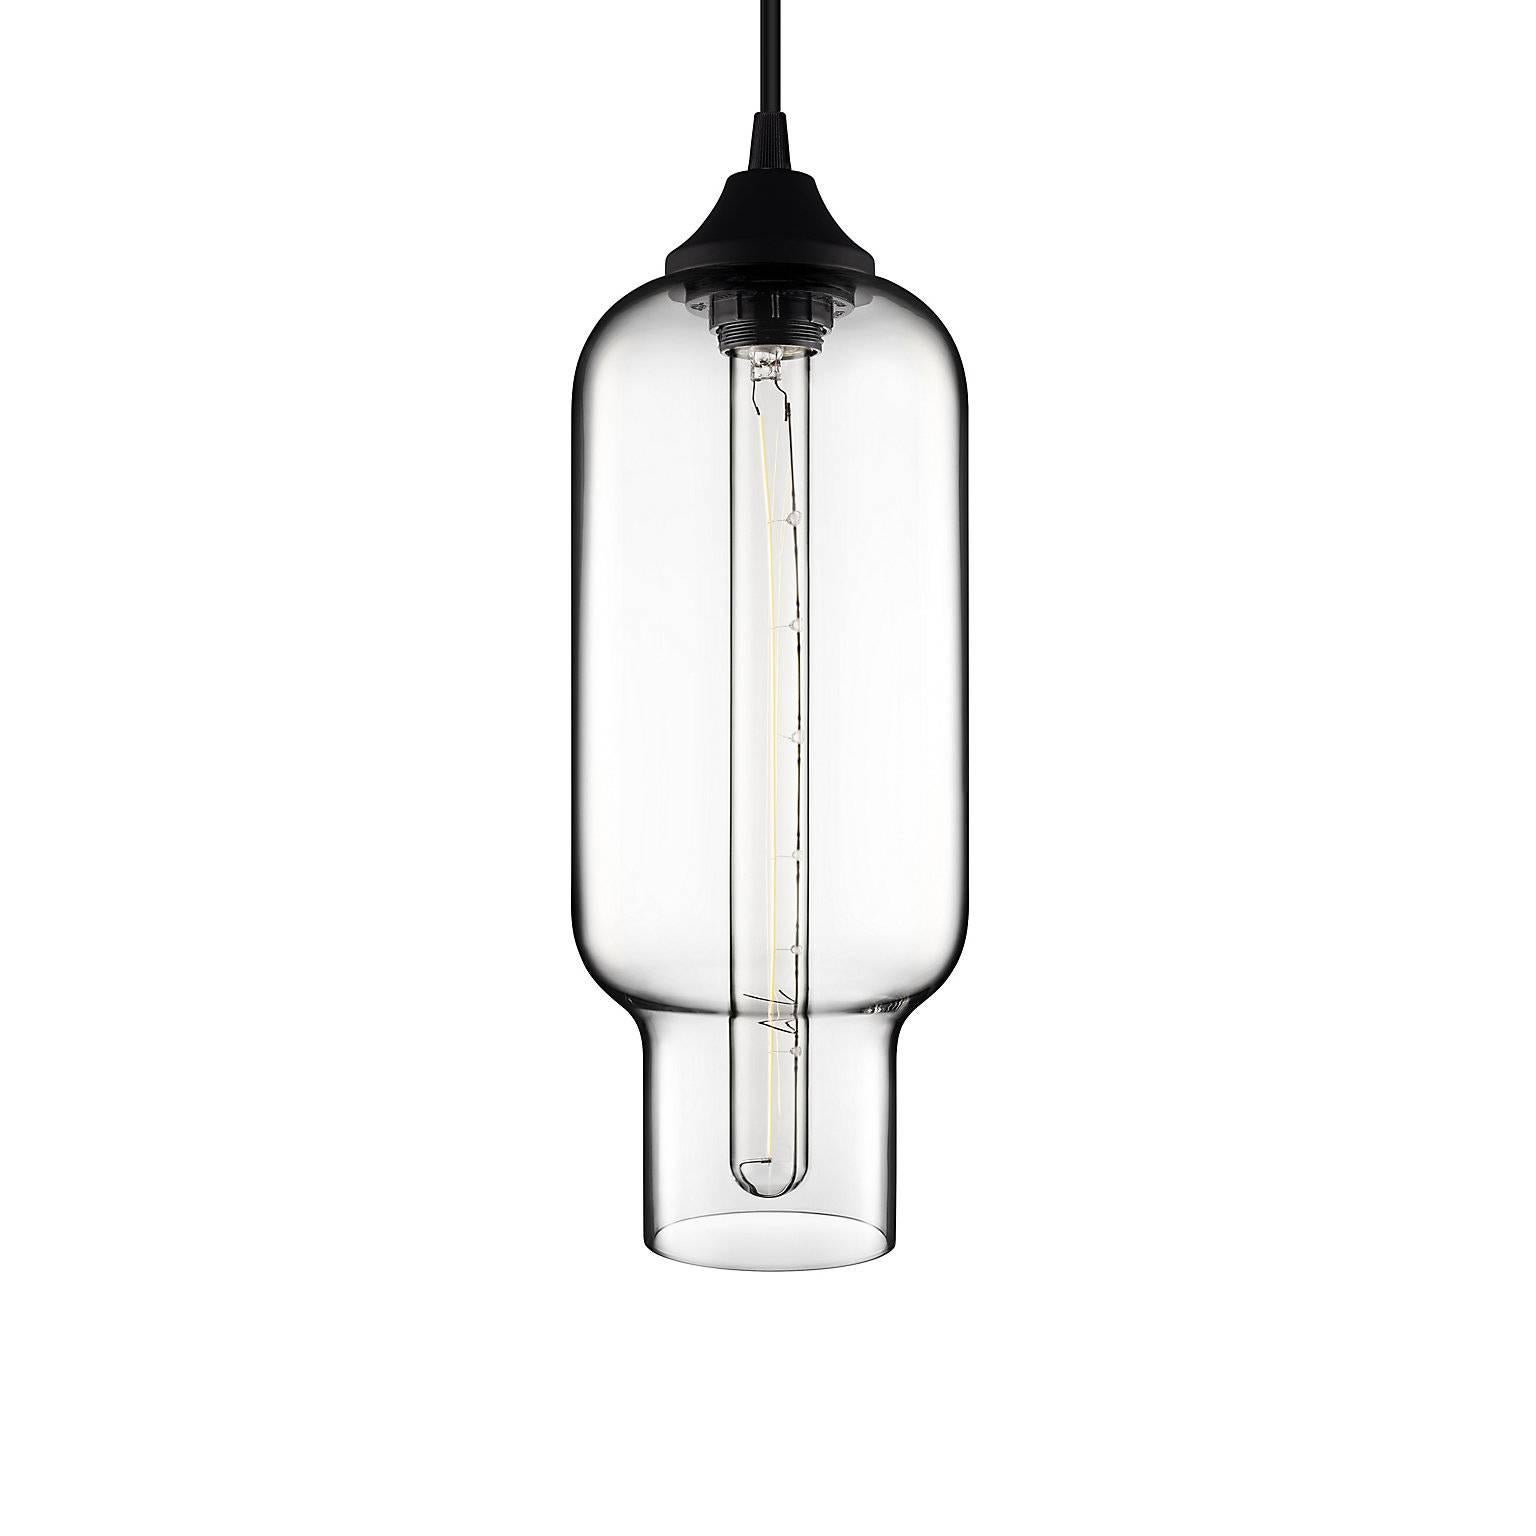 Pharos Plum Handblown Modern Glass Pendant Light, Made in the USA In New Condition For Sale In Beacon, NY